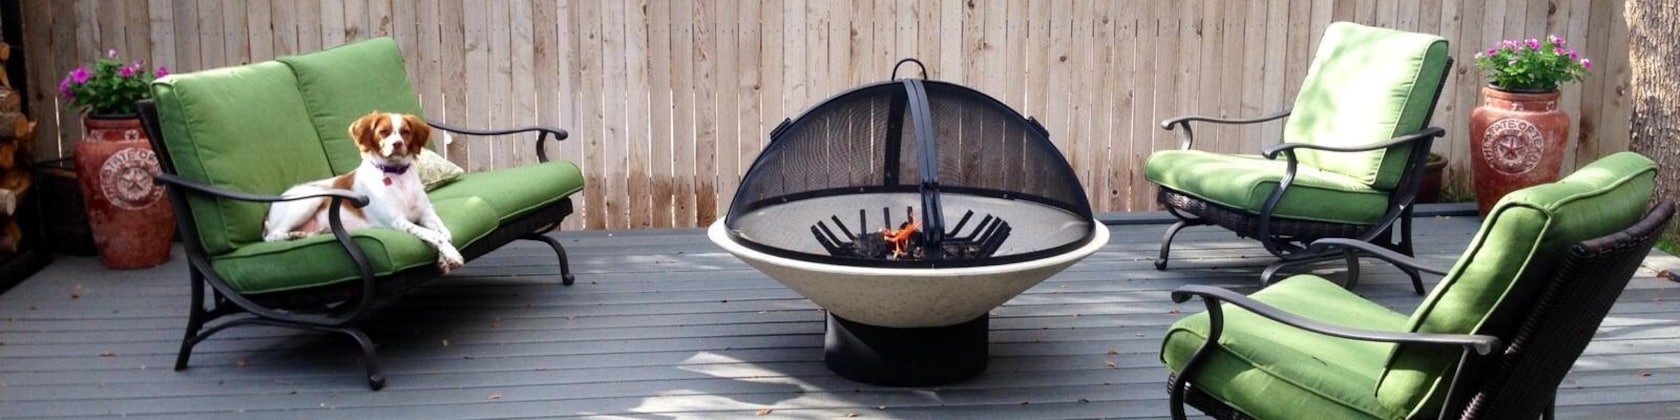 Fire pit spark screens,pivot,dome,square.Folding firepit covers.